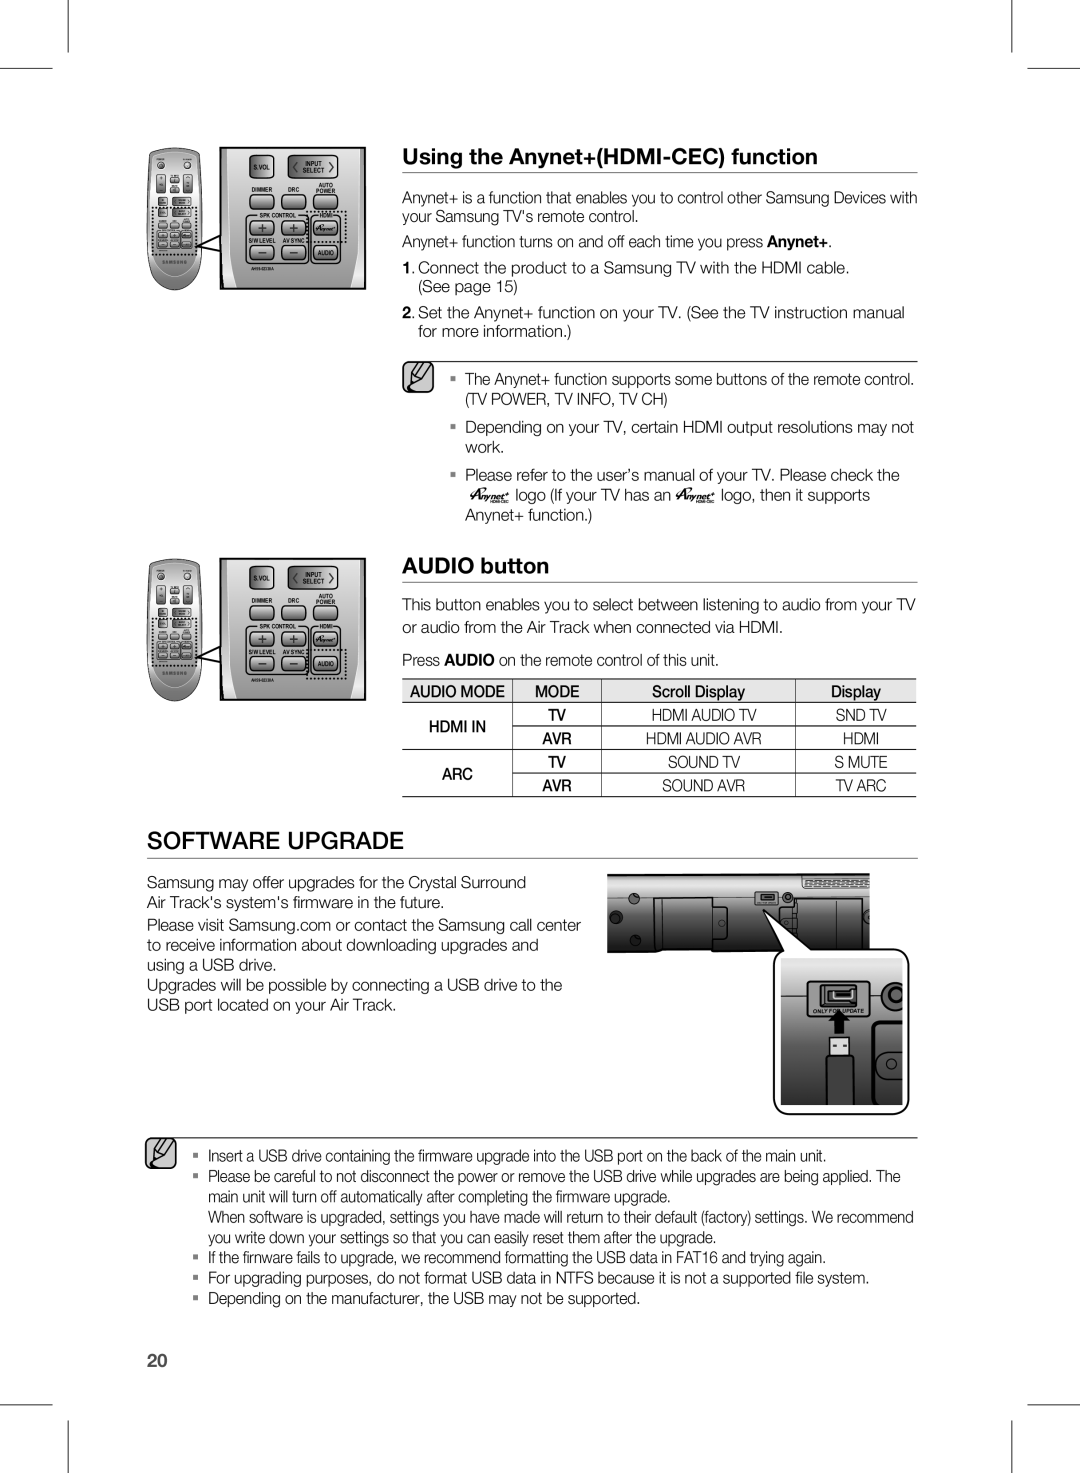 Samsung HW-D551, HW-D550 user manual Software Upgrade, Using the Anynet+HDMI-CECfunction, AUDIO button 